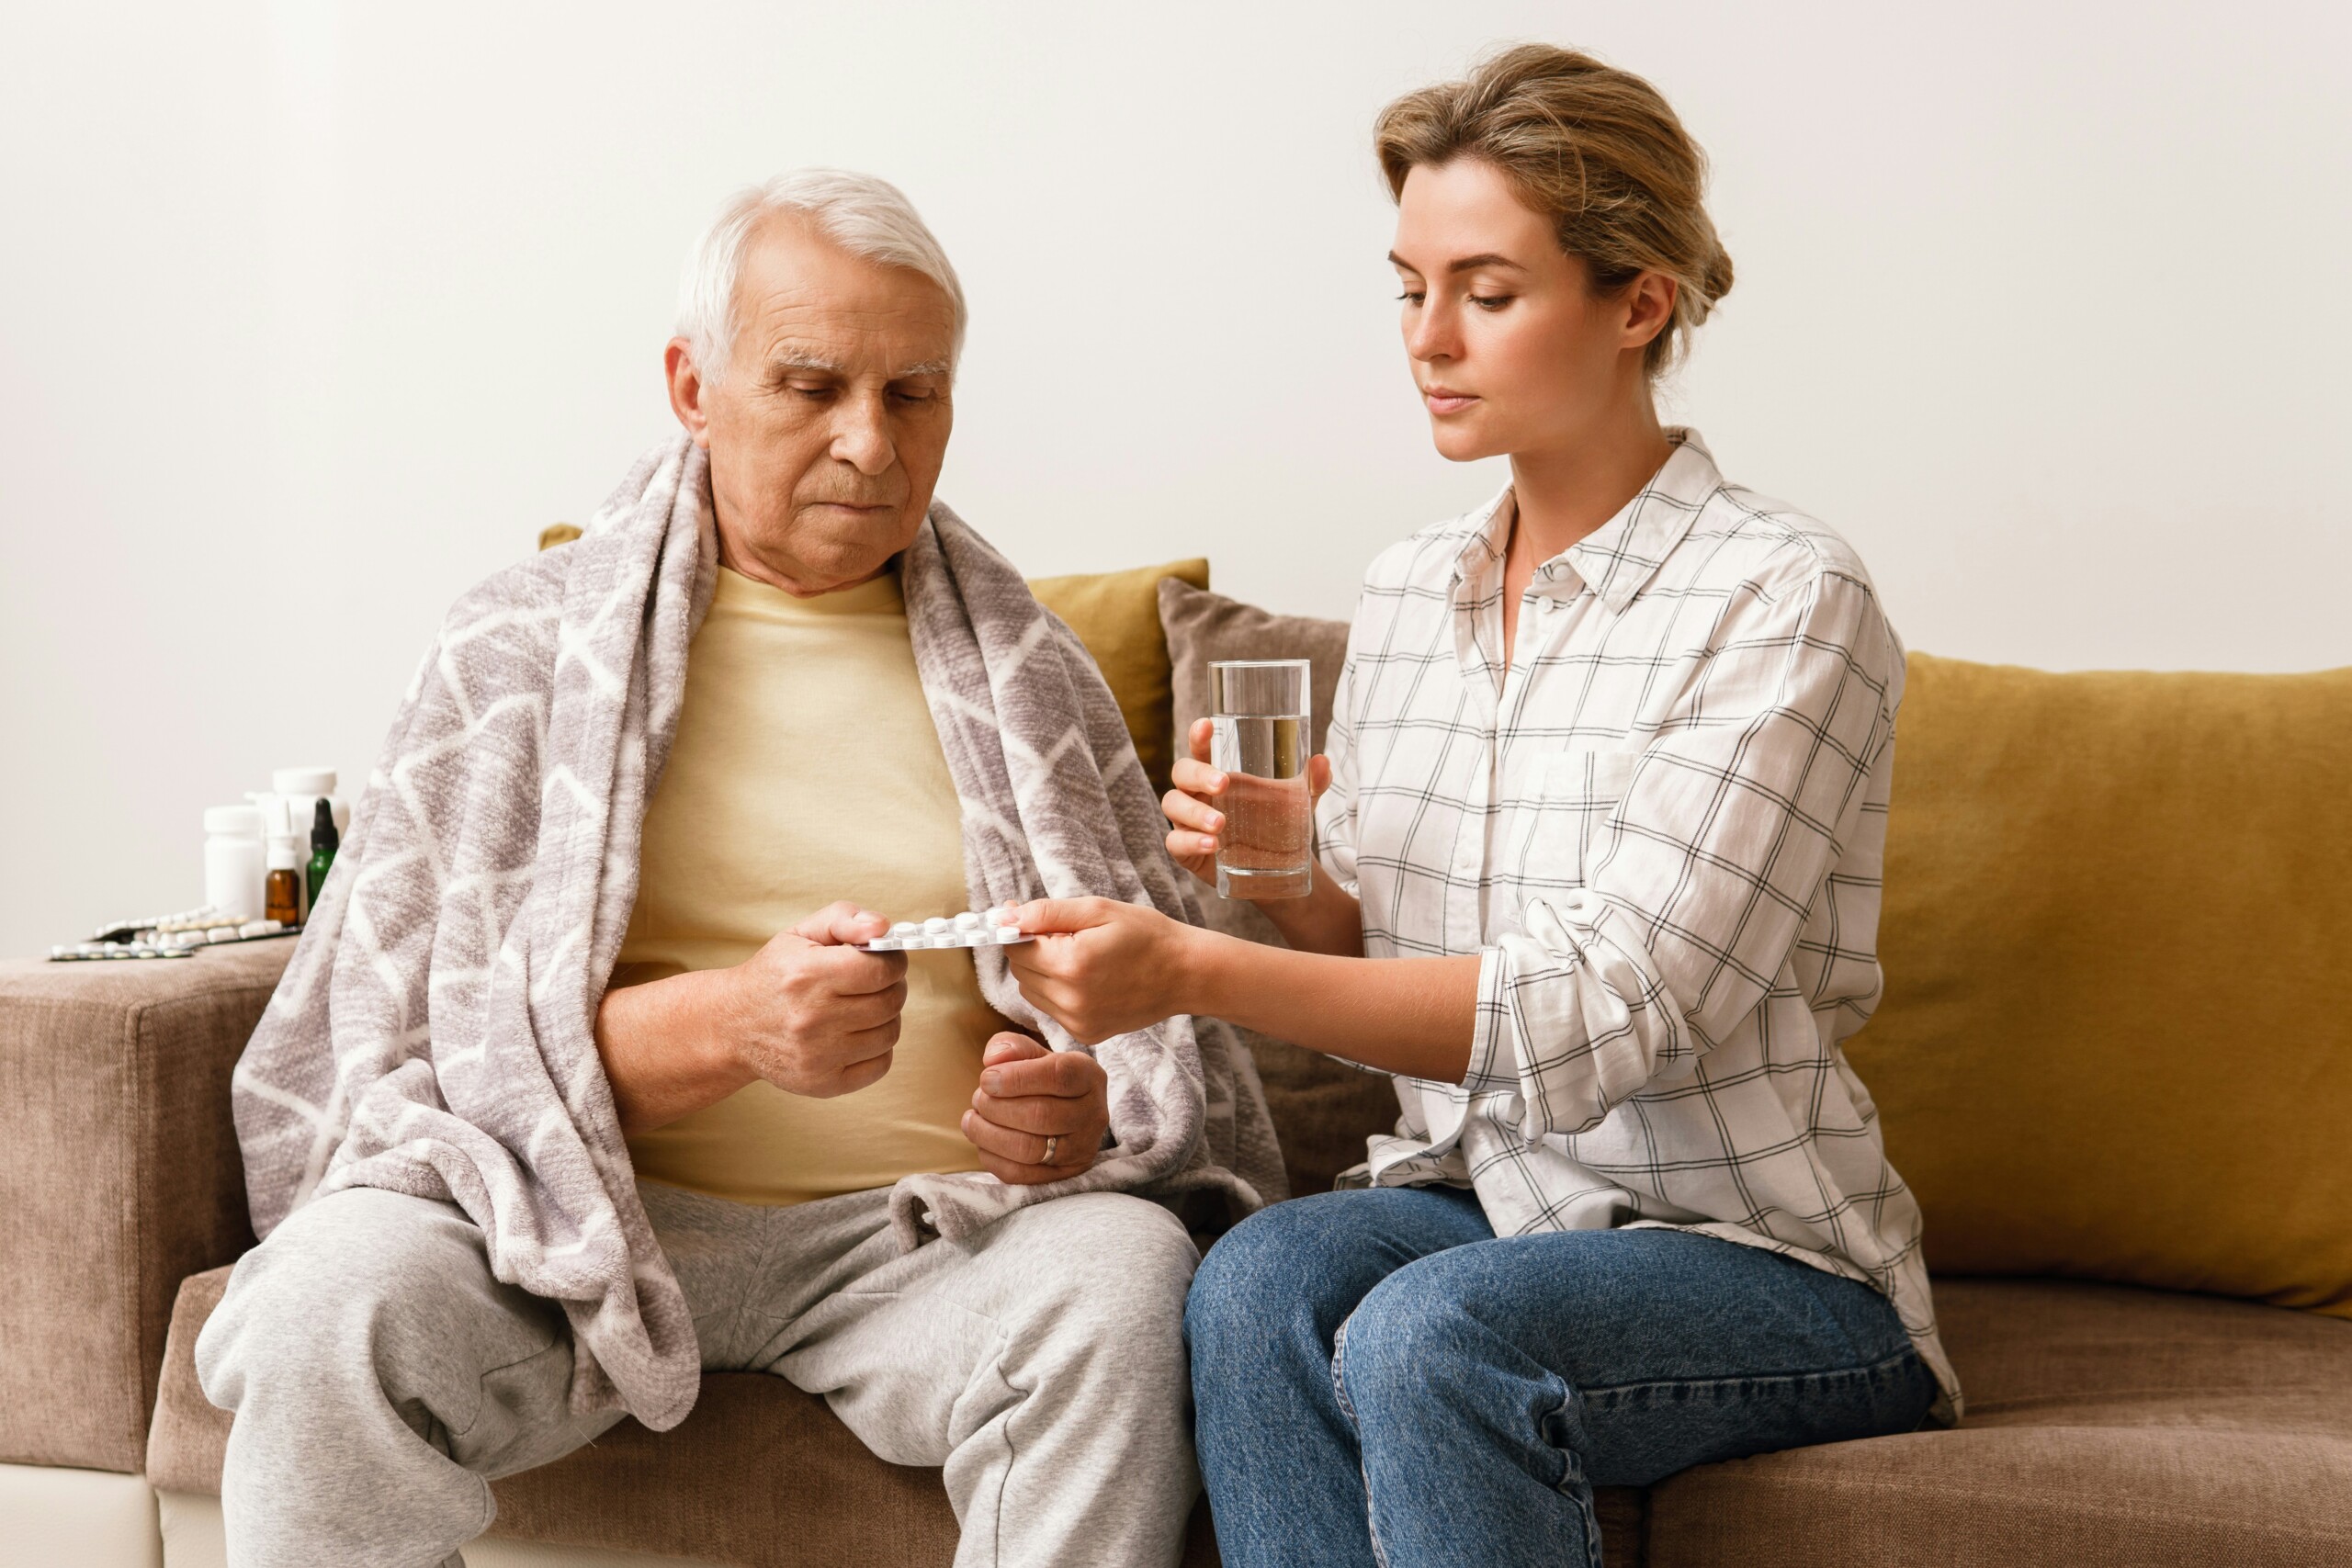 How Can You Manage the Role of Caregiving?